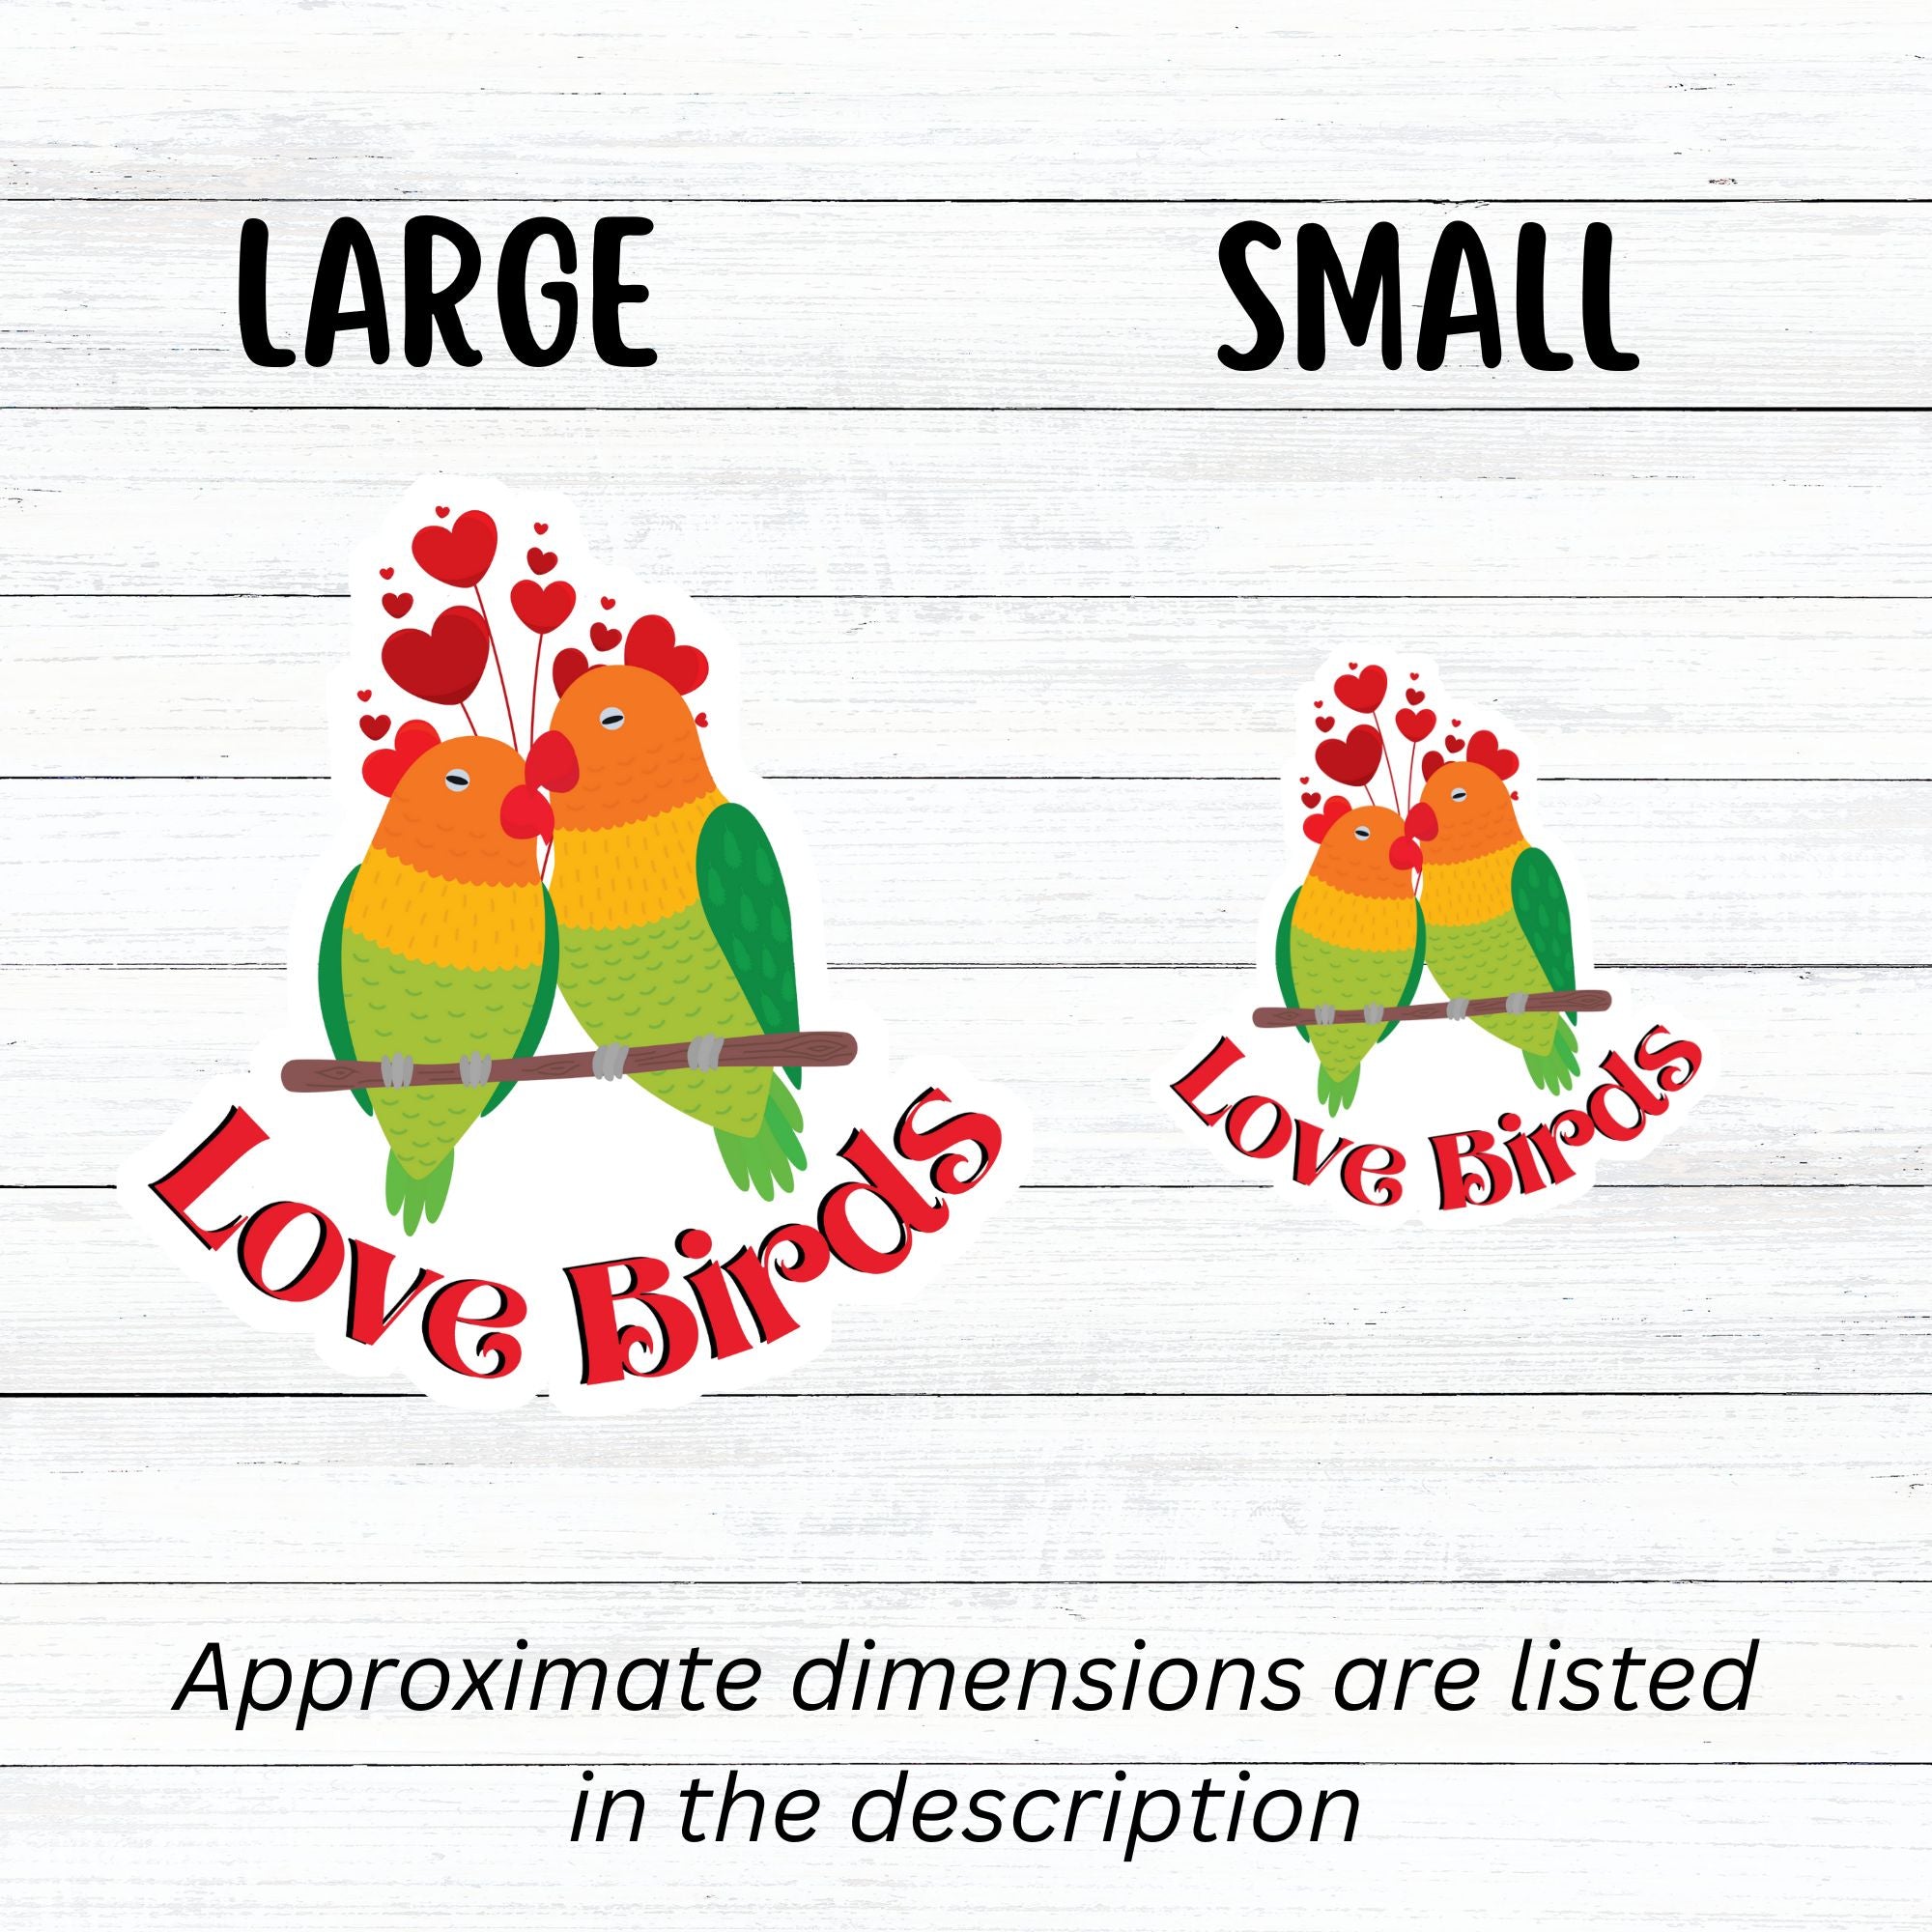 Aww, Love Birds! This individual die-cut sticker features a pair of love birds with hearts above. This is a perfect gift for your love bird! This image shows large and small Love Birds stickers next to each other.